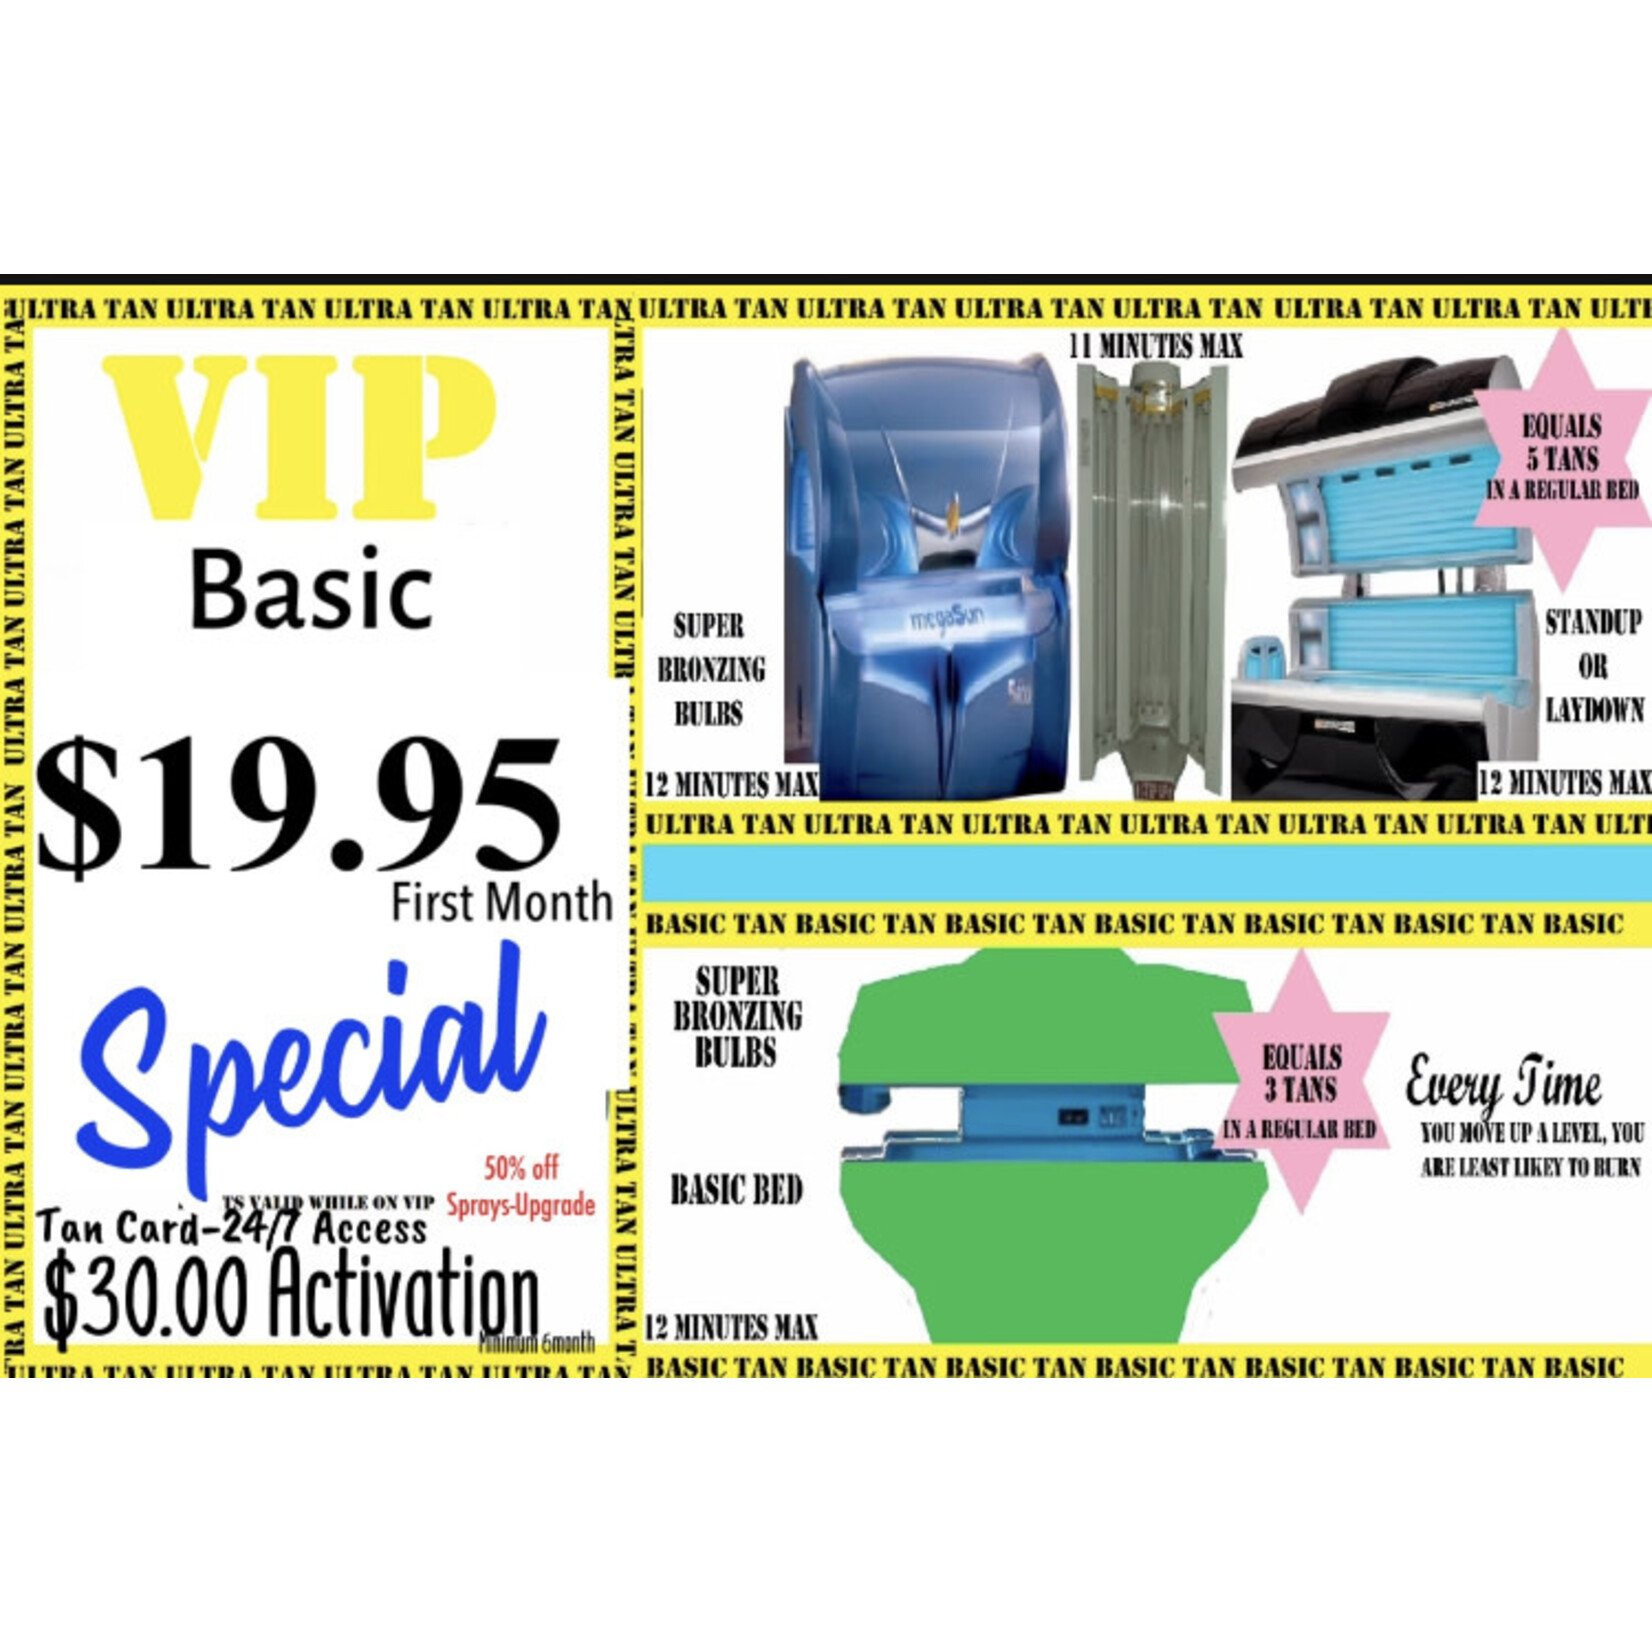 CALIFORNIA BRONZE VIP BASIC  SPECIAL + ACTIVATION INCLUDES CARD + CODE